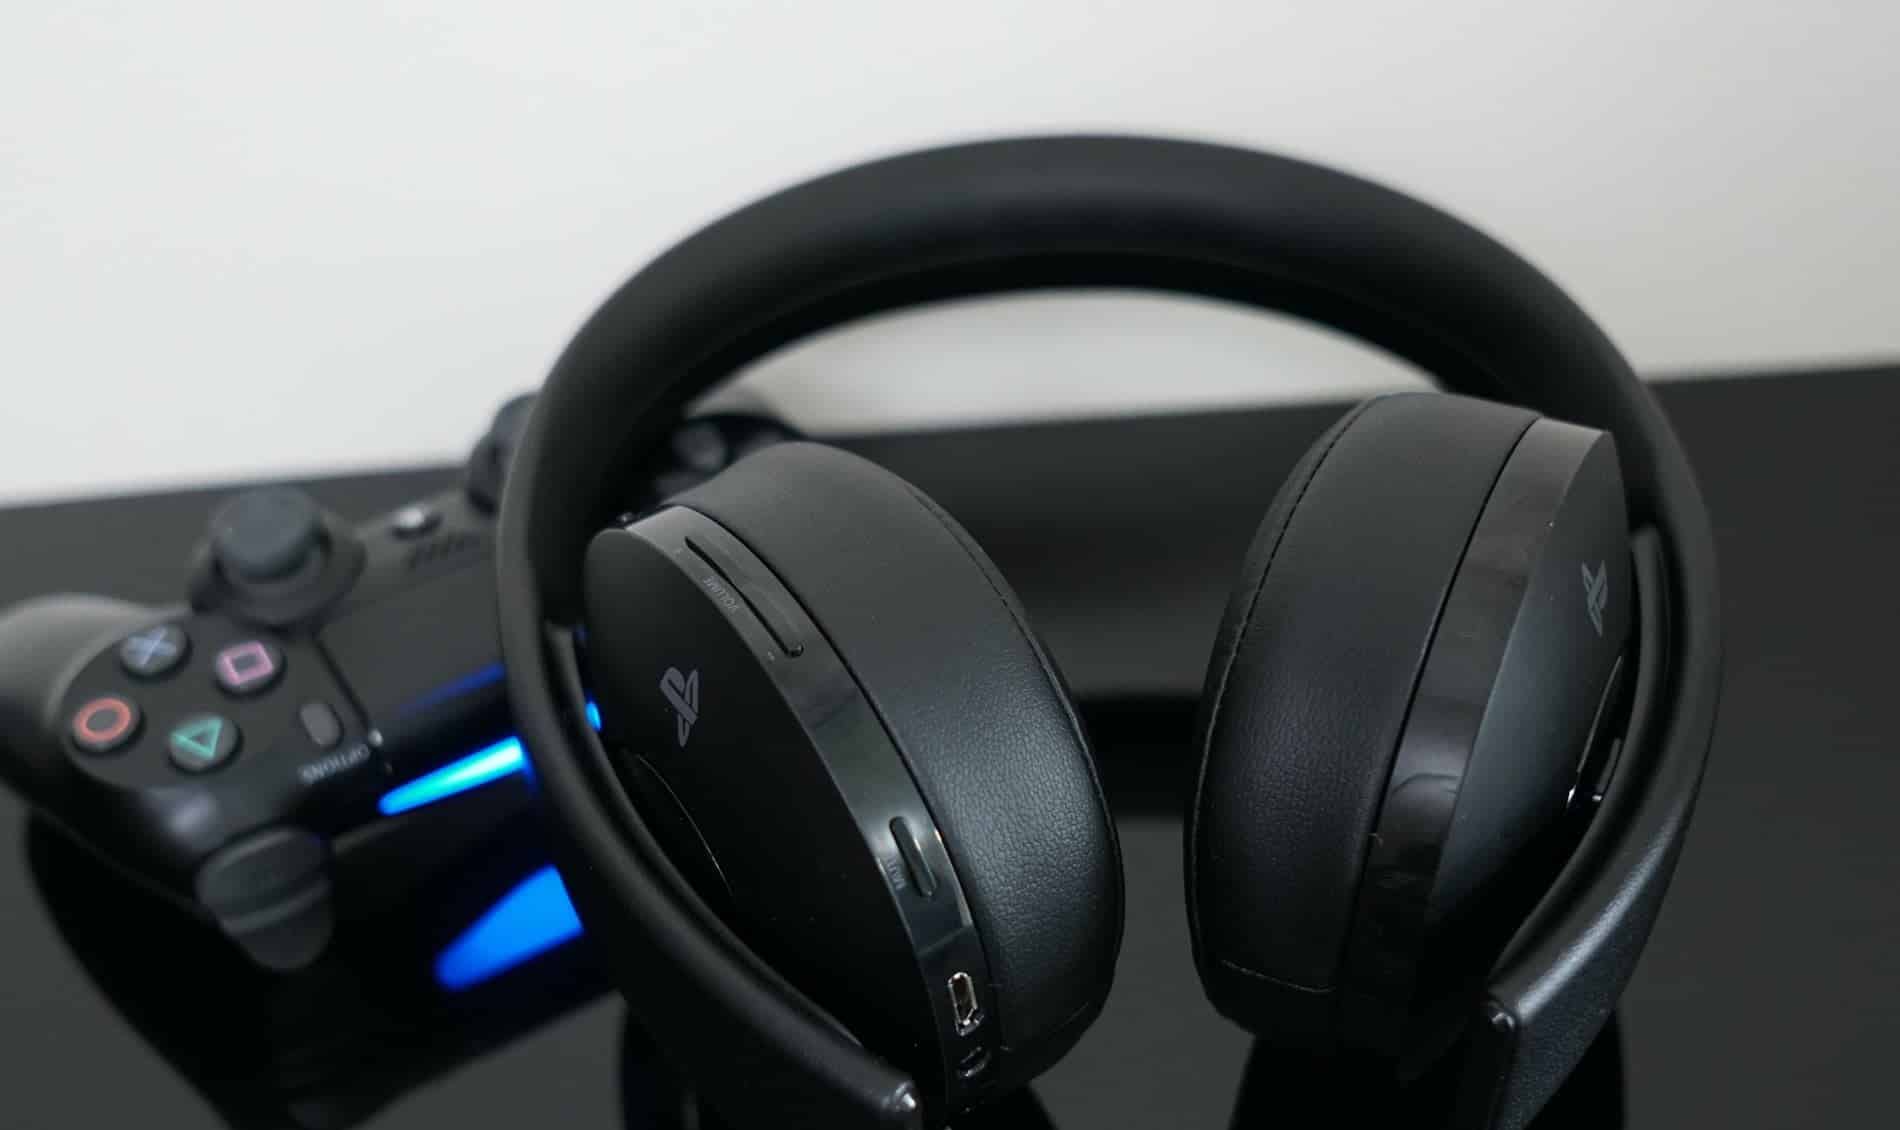 Bluetooth audio devices are not supported by ps4